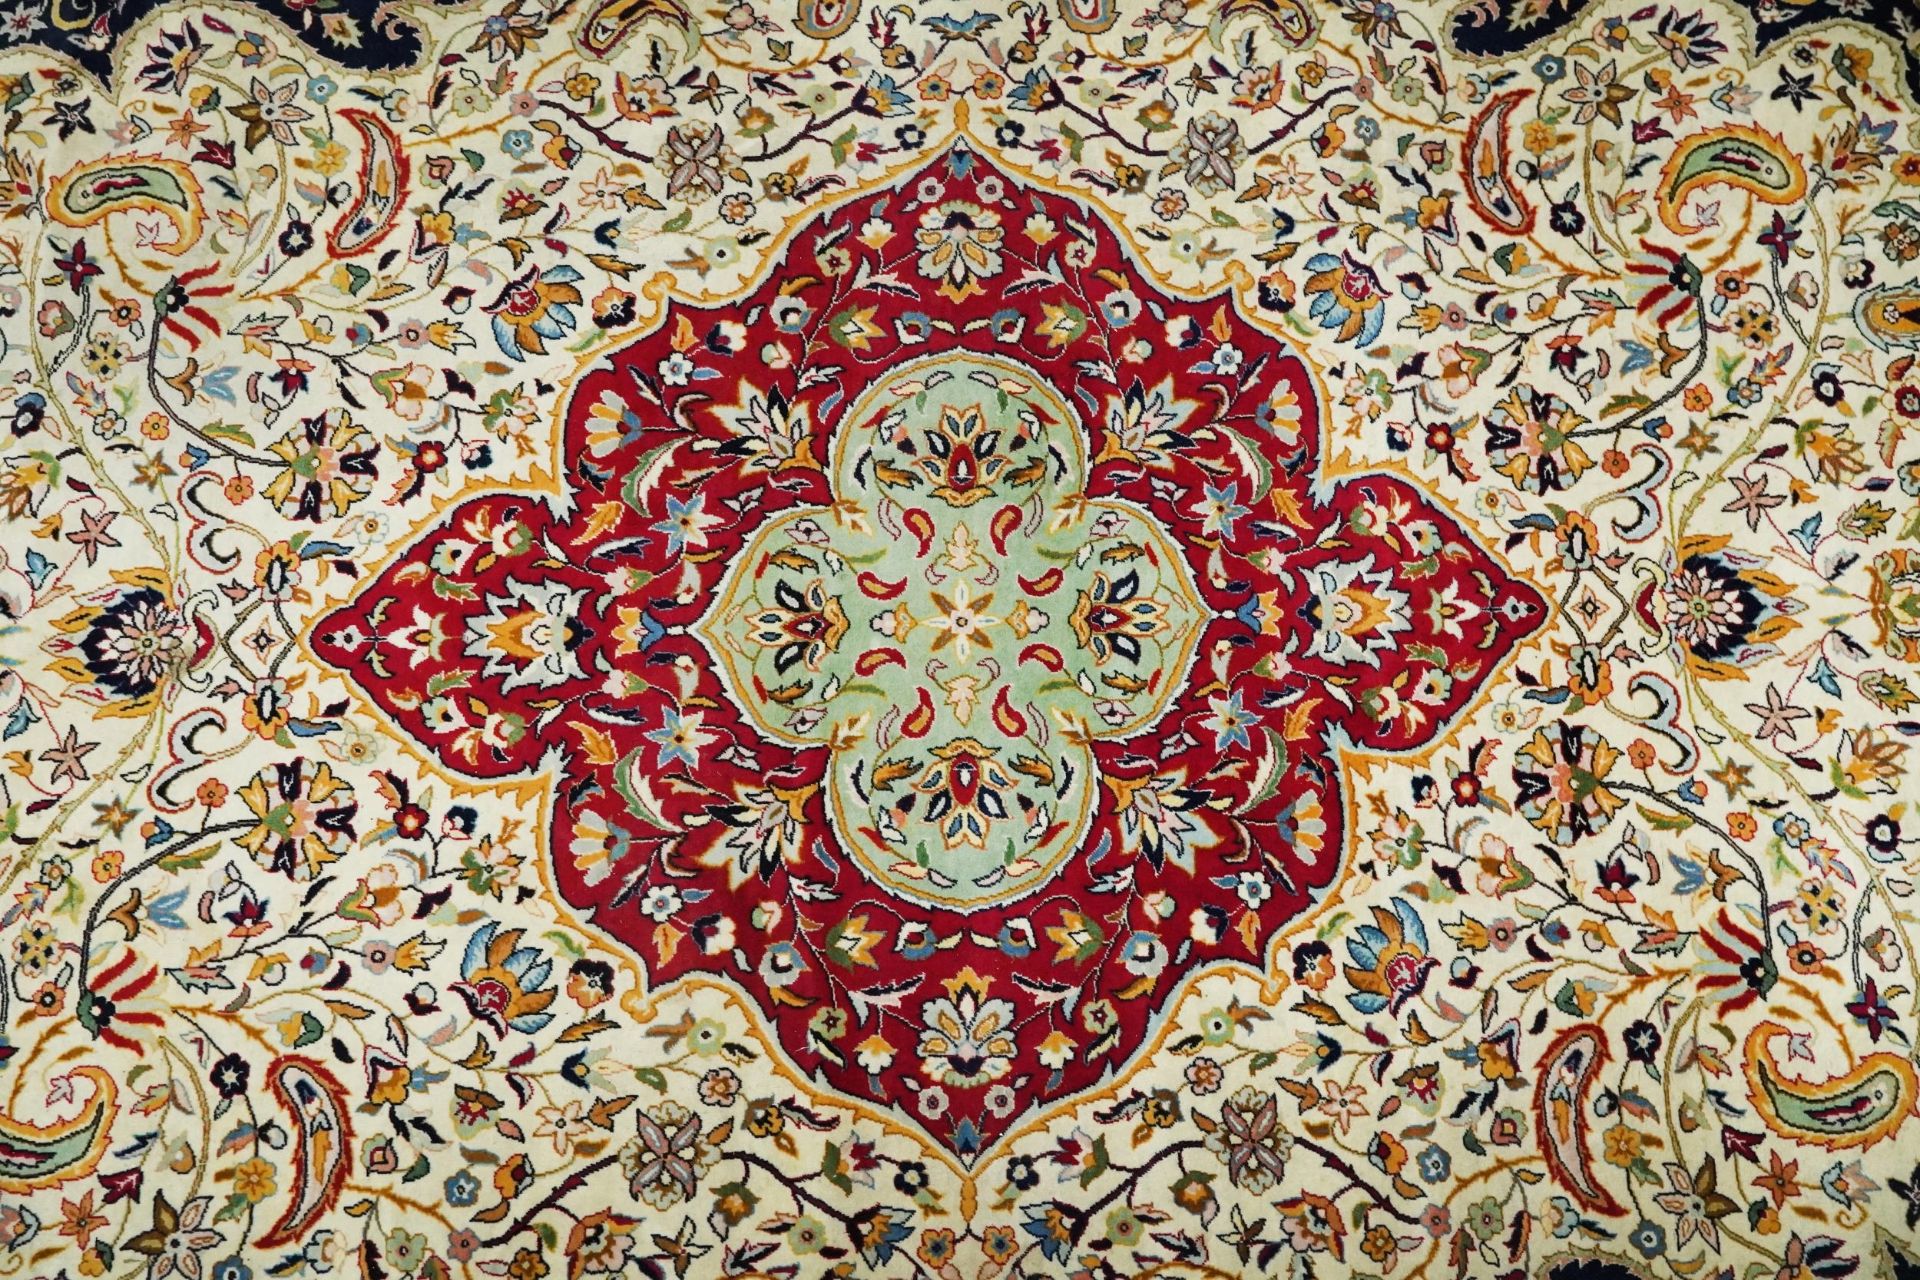 Rectangular Persian cream and red ground rug having an all over repeat floral design, 370cm x 270cm - Image 6 of 12